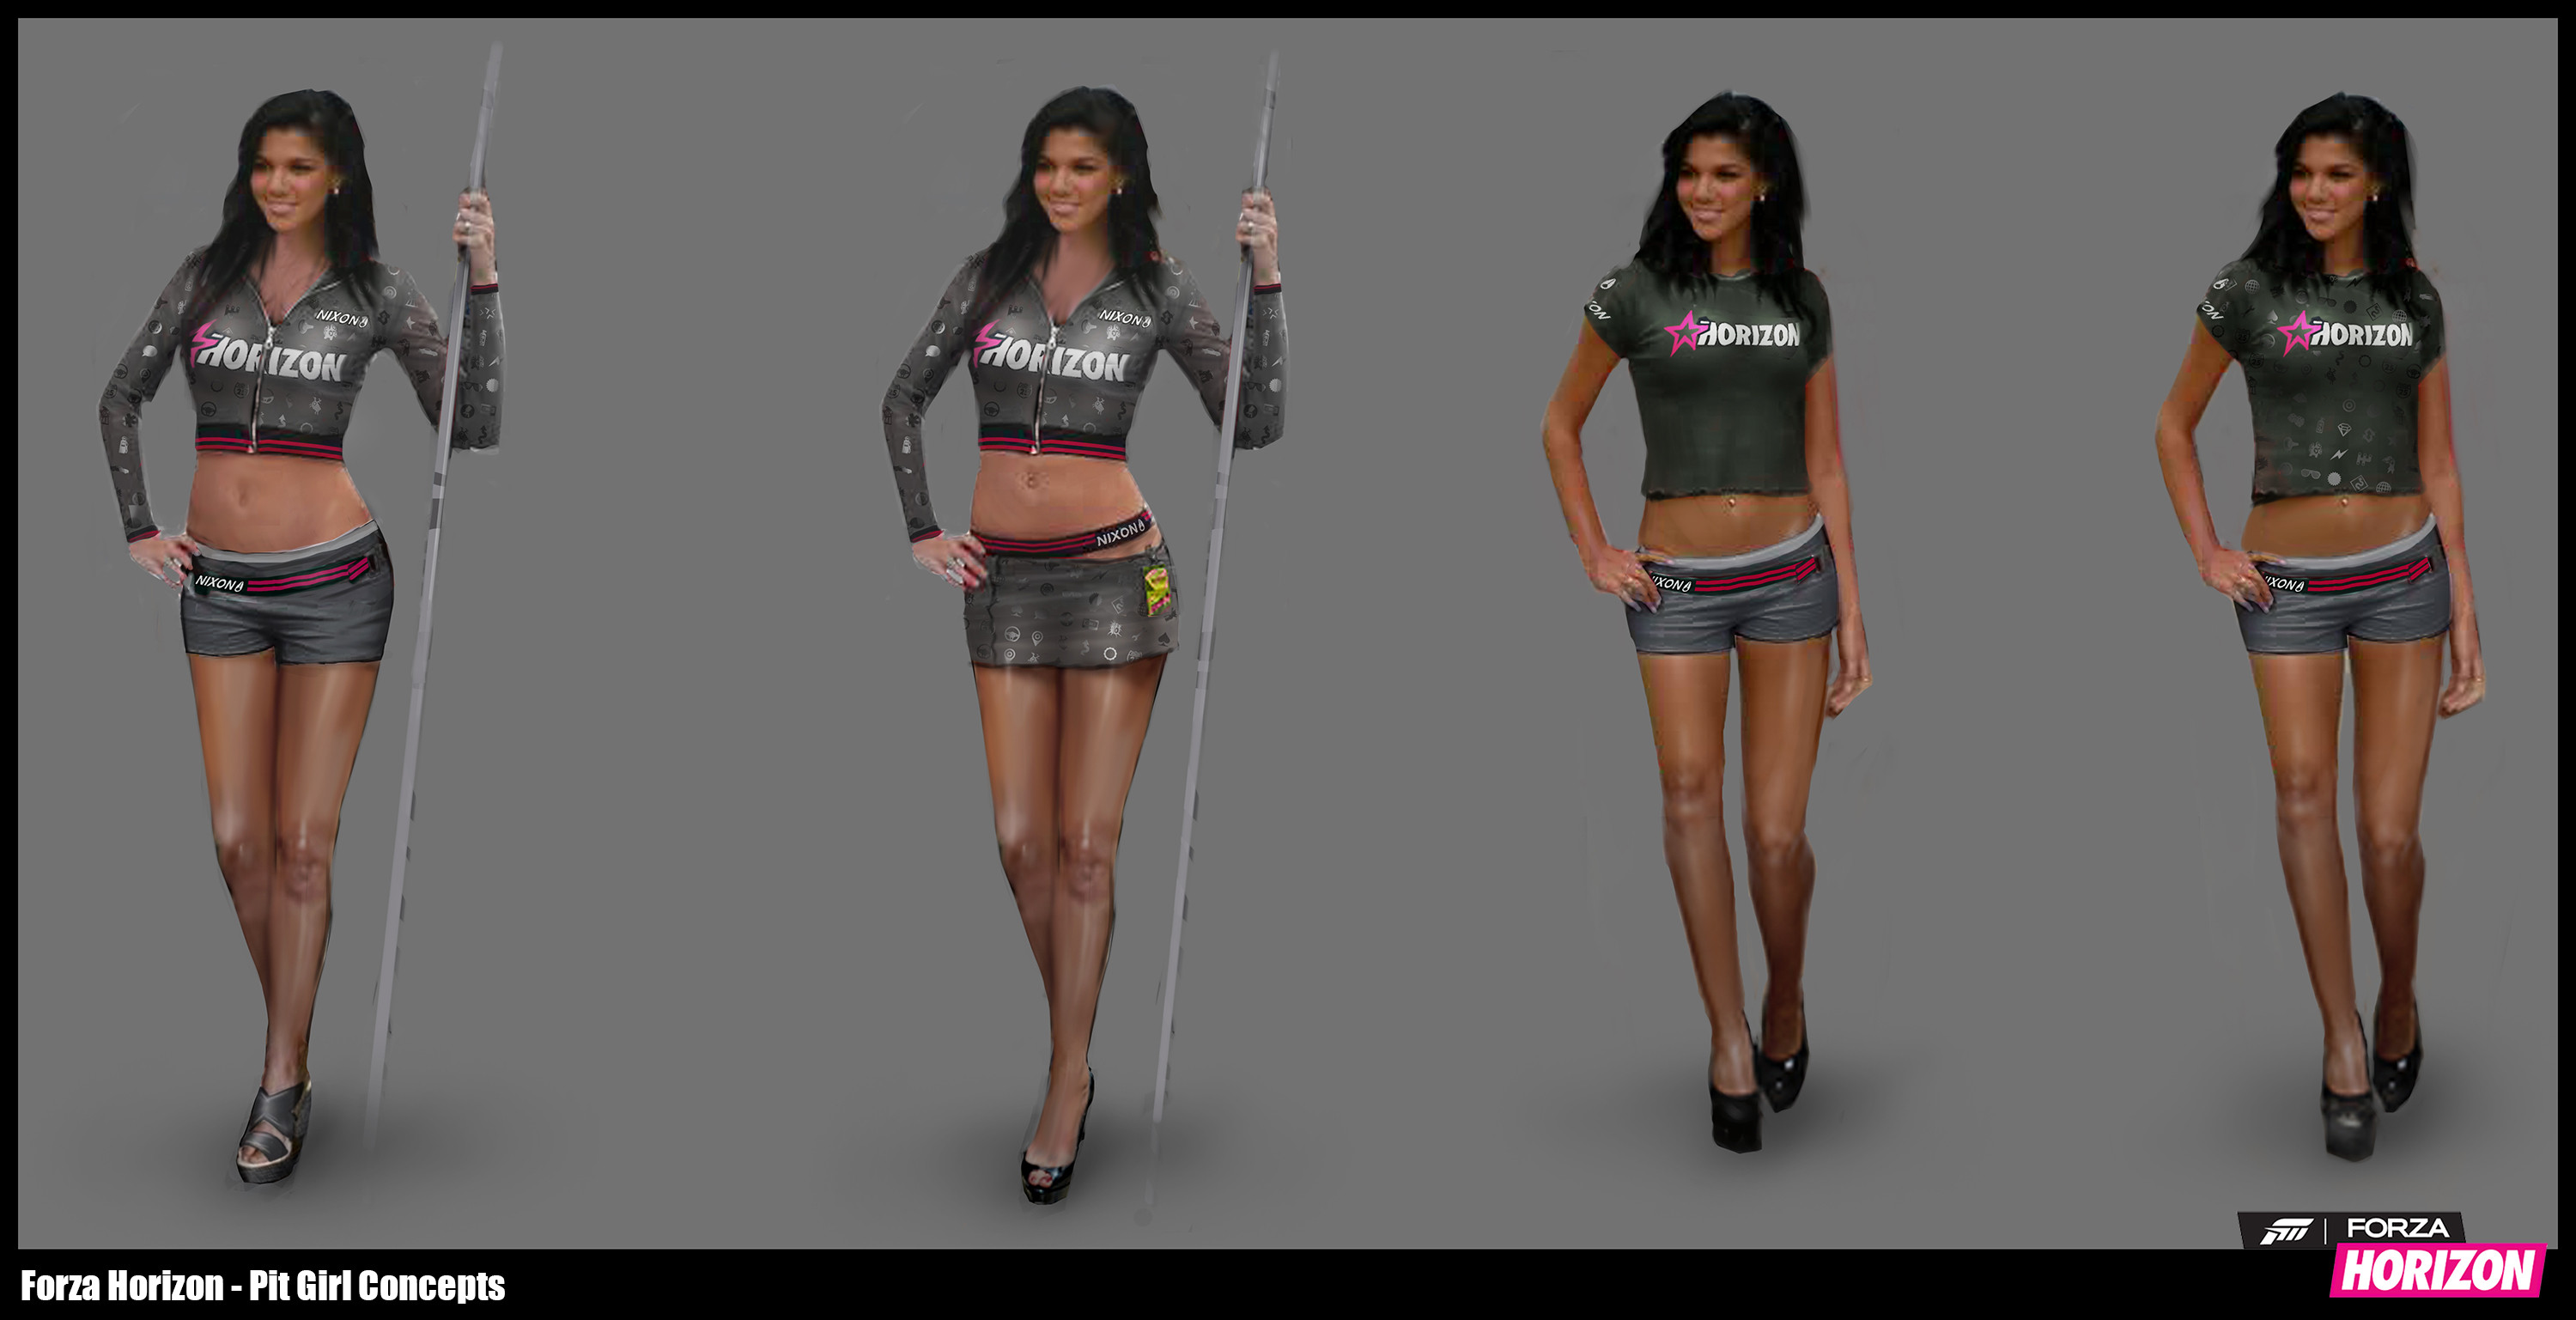 Forza Horizon - Pit Girl concept variations